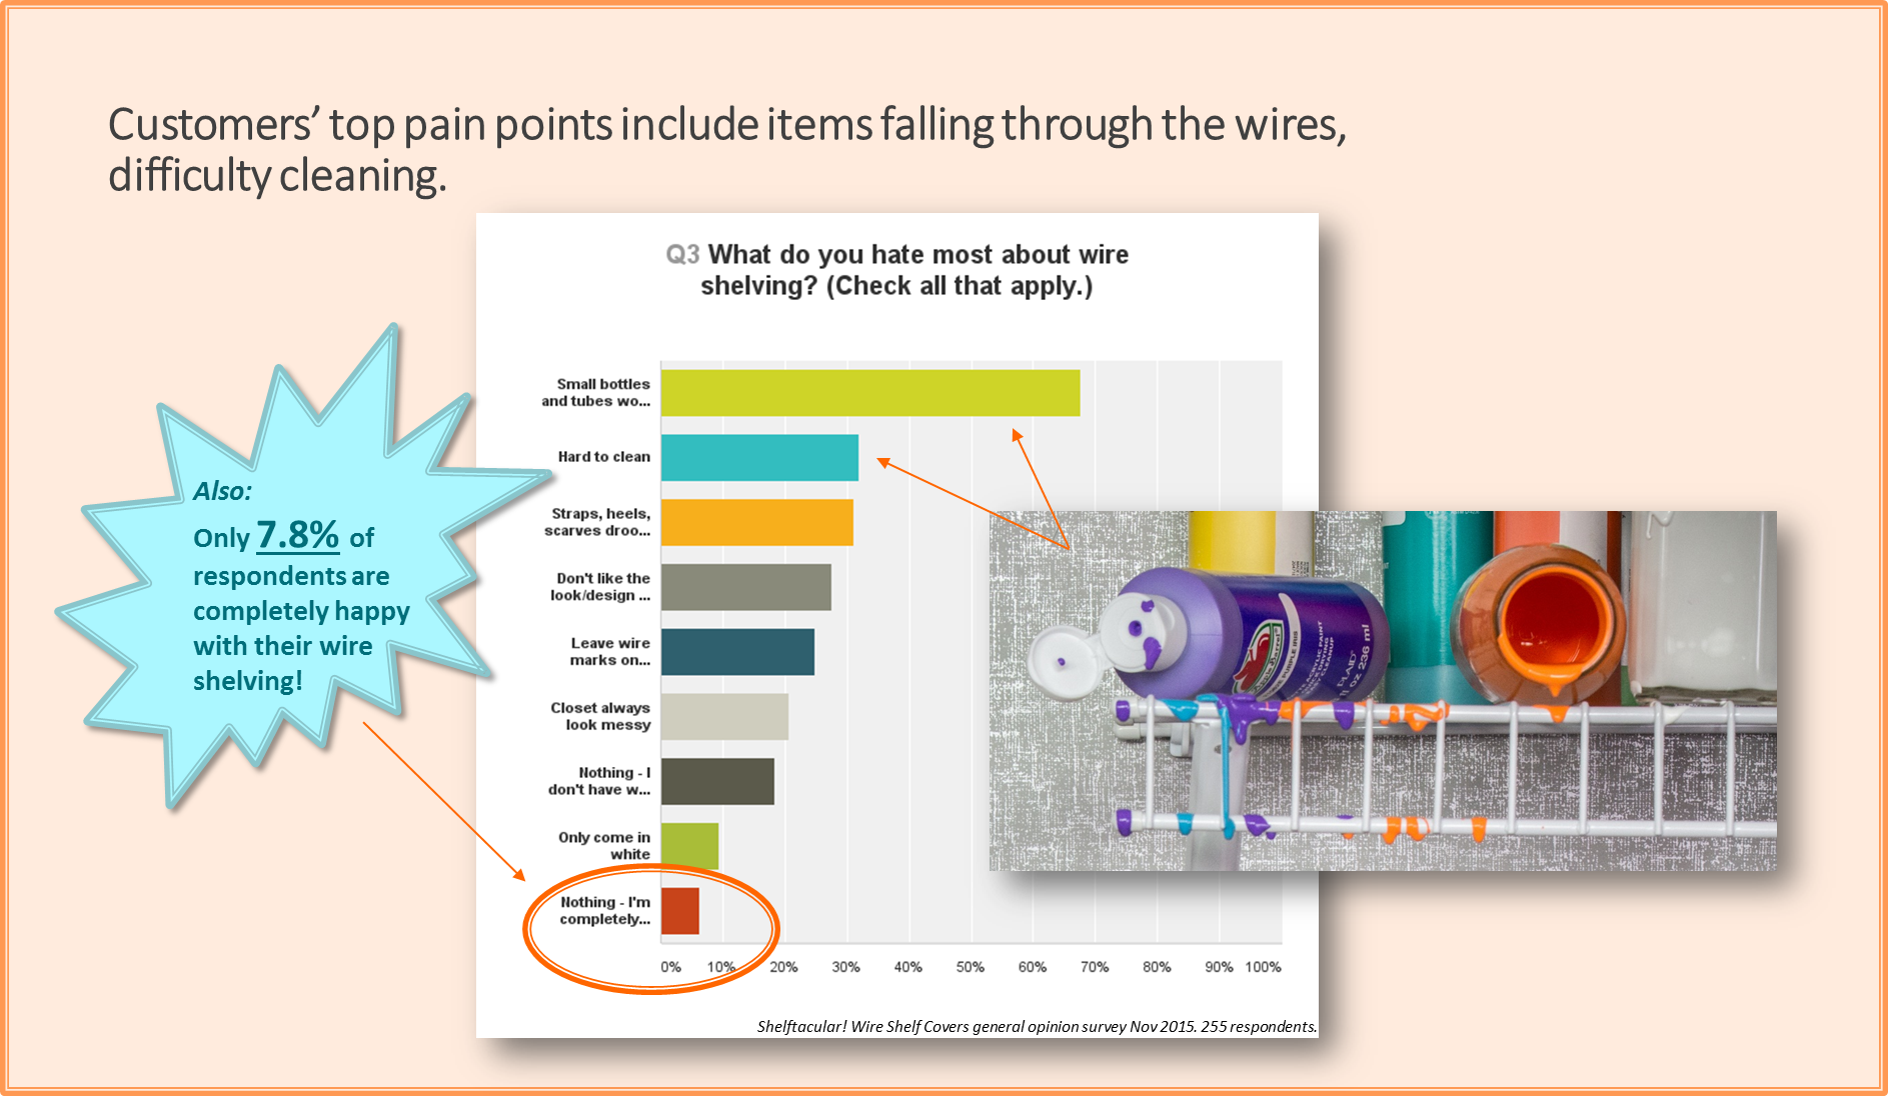 Consumers Hate the Mess of Wire Shelving!